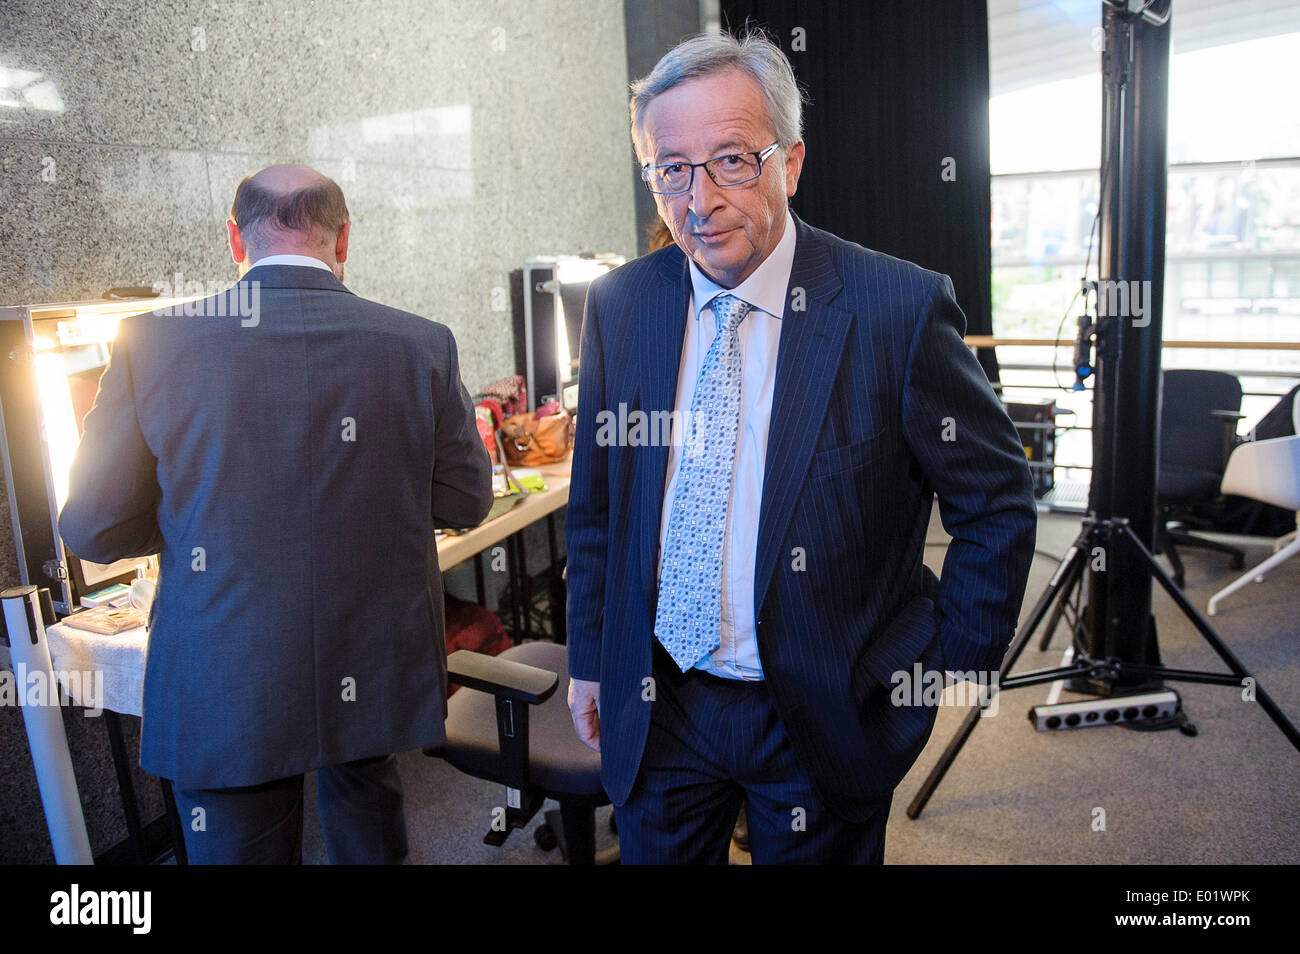 Brussels, Belgium. 29th April 2014. Jean-Claude Juncker, top candidate for European People's Party (EPP) ahead of Euranet's 'Big Crunch' Presidential debate at the EU parliament in BrusselsThe four top candidates for the presidency of the European Commission - Jean-Claude Juncker, Ska Keller, Martin Schulz and Guy Verhofstadt - attend EU-wide debate organized by EuranetPlus and focused on the major election topics. Credit:  dpa picture alliance/Alamy Live News Stock Photo